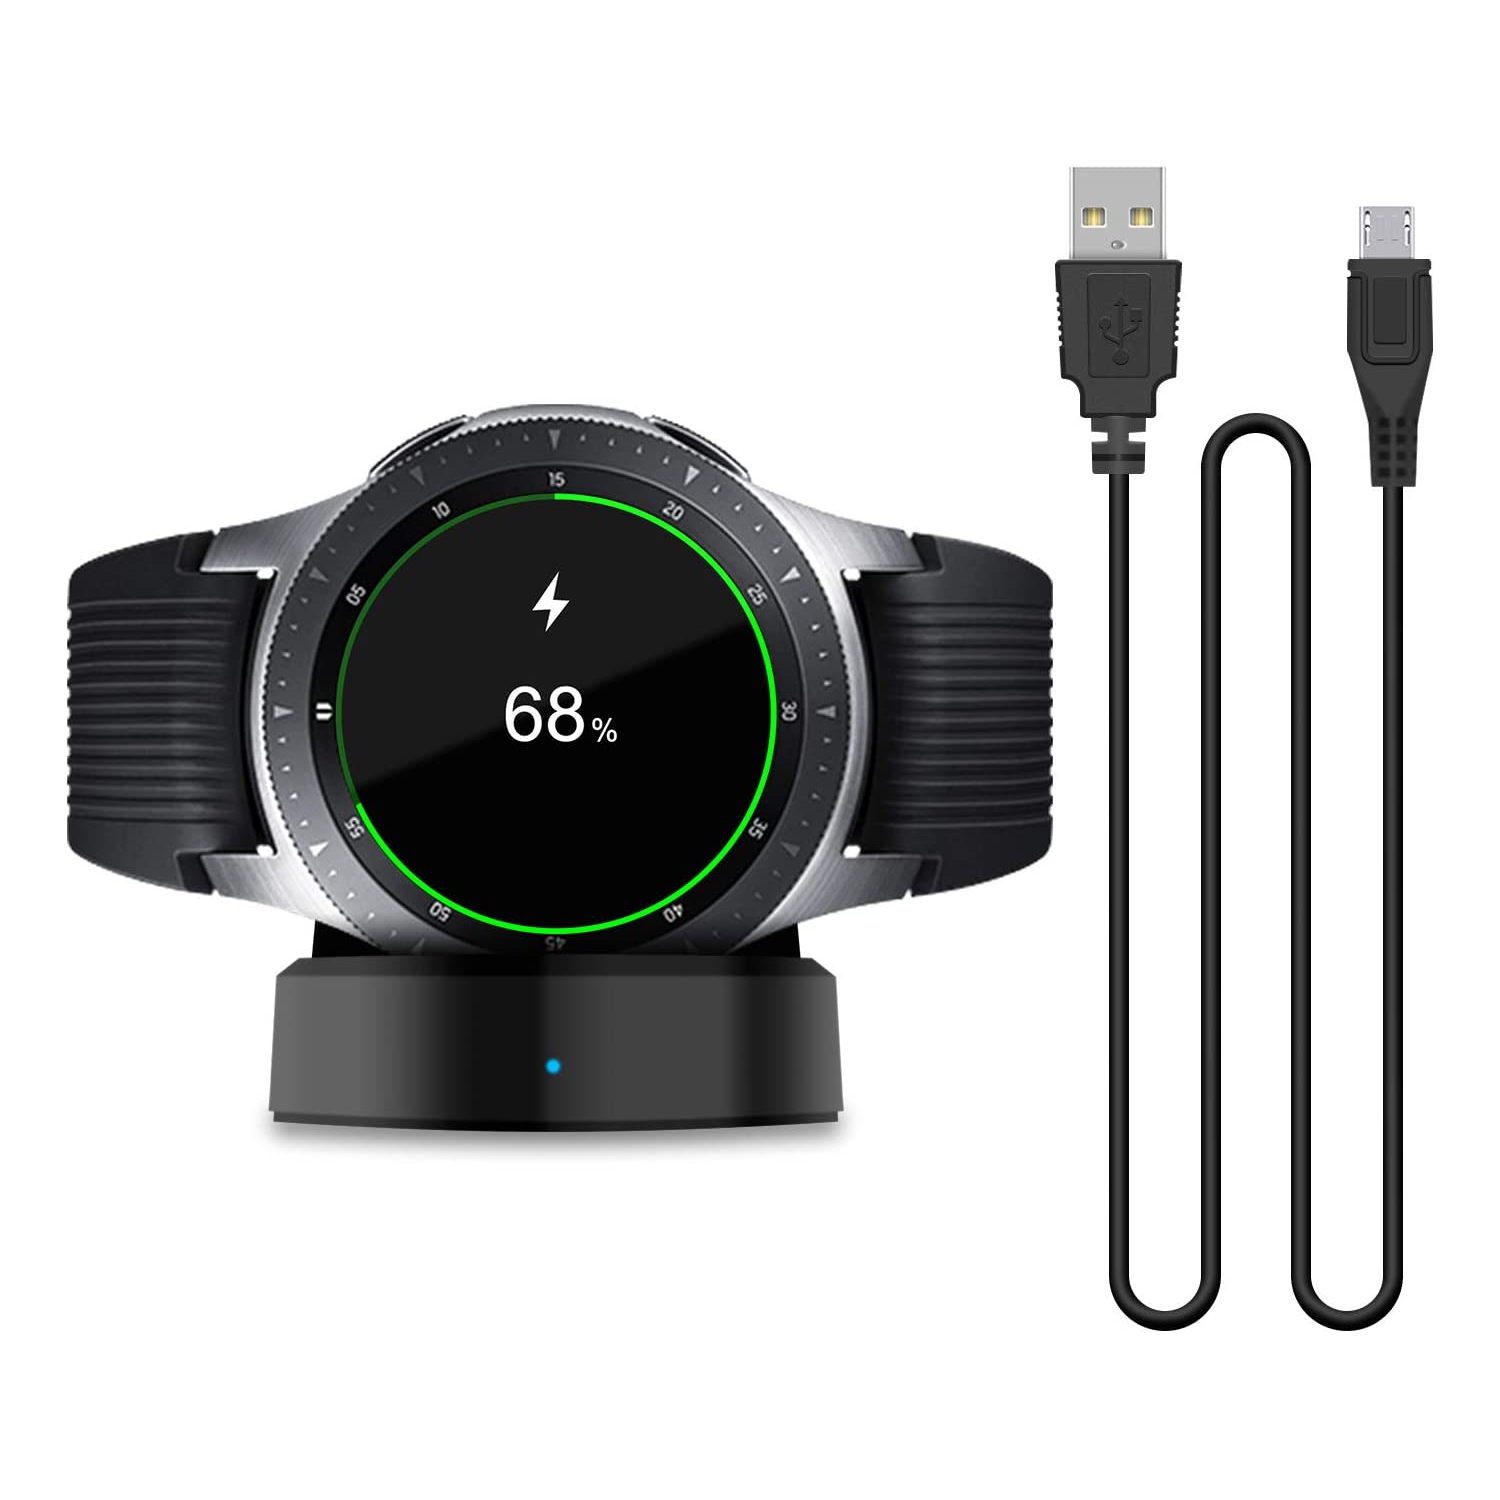 Updated Charger Compatible with Samsung Galaxy Smart Watch 42mm 46mm, Replacement Charging Dock Cradle Only Compatible